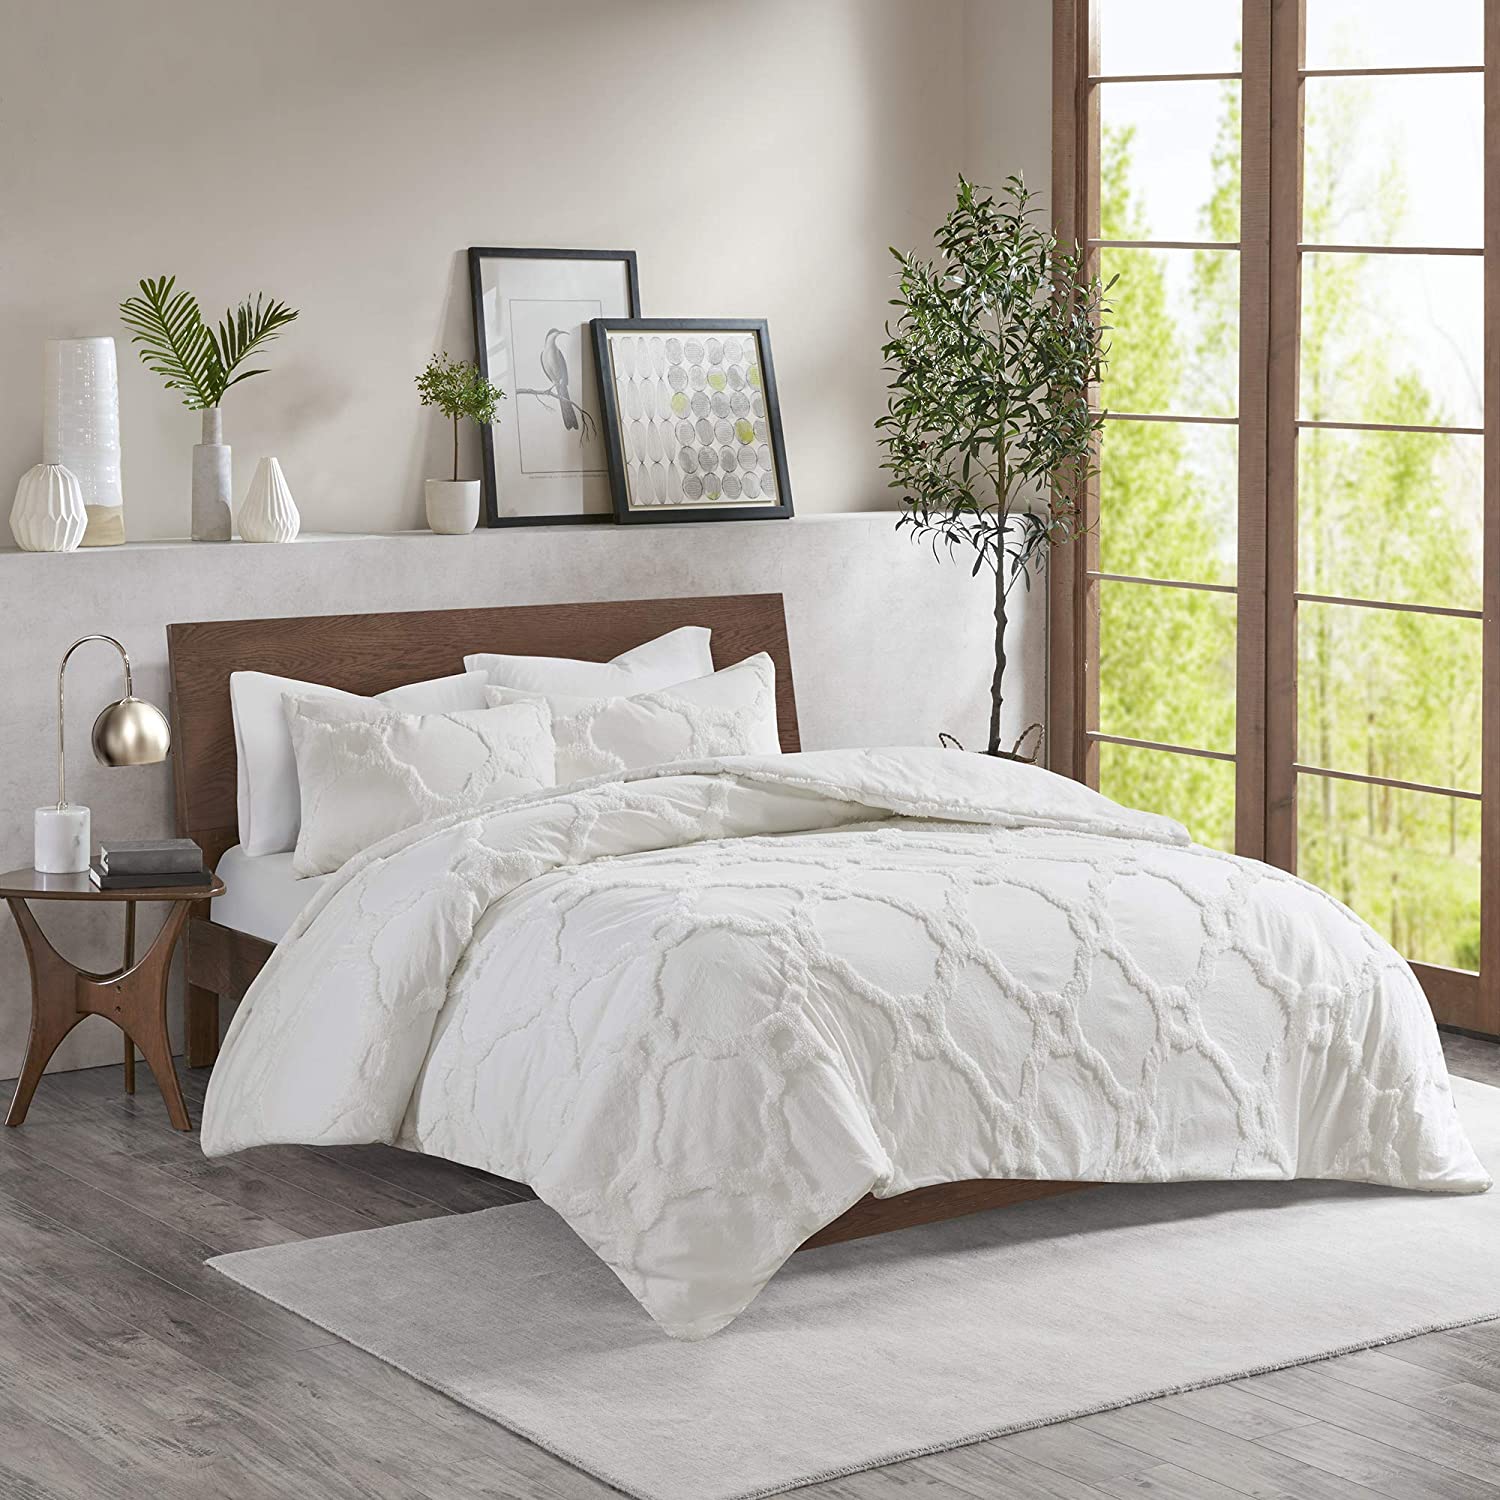 Price:$45.99  Park Tufted Chenille 100% Cotton Duvet- Modern Luxe All Season Comforter Cover Bed Set with Matching Shams, Pacey, Ogee Off White Full/Queen(90"x90") 3 Piece : Home & Kitchen